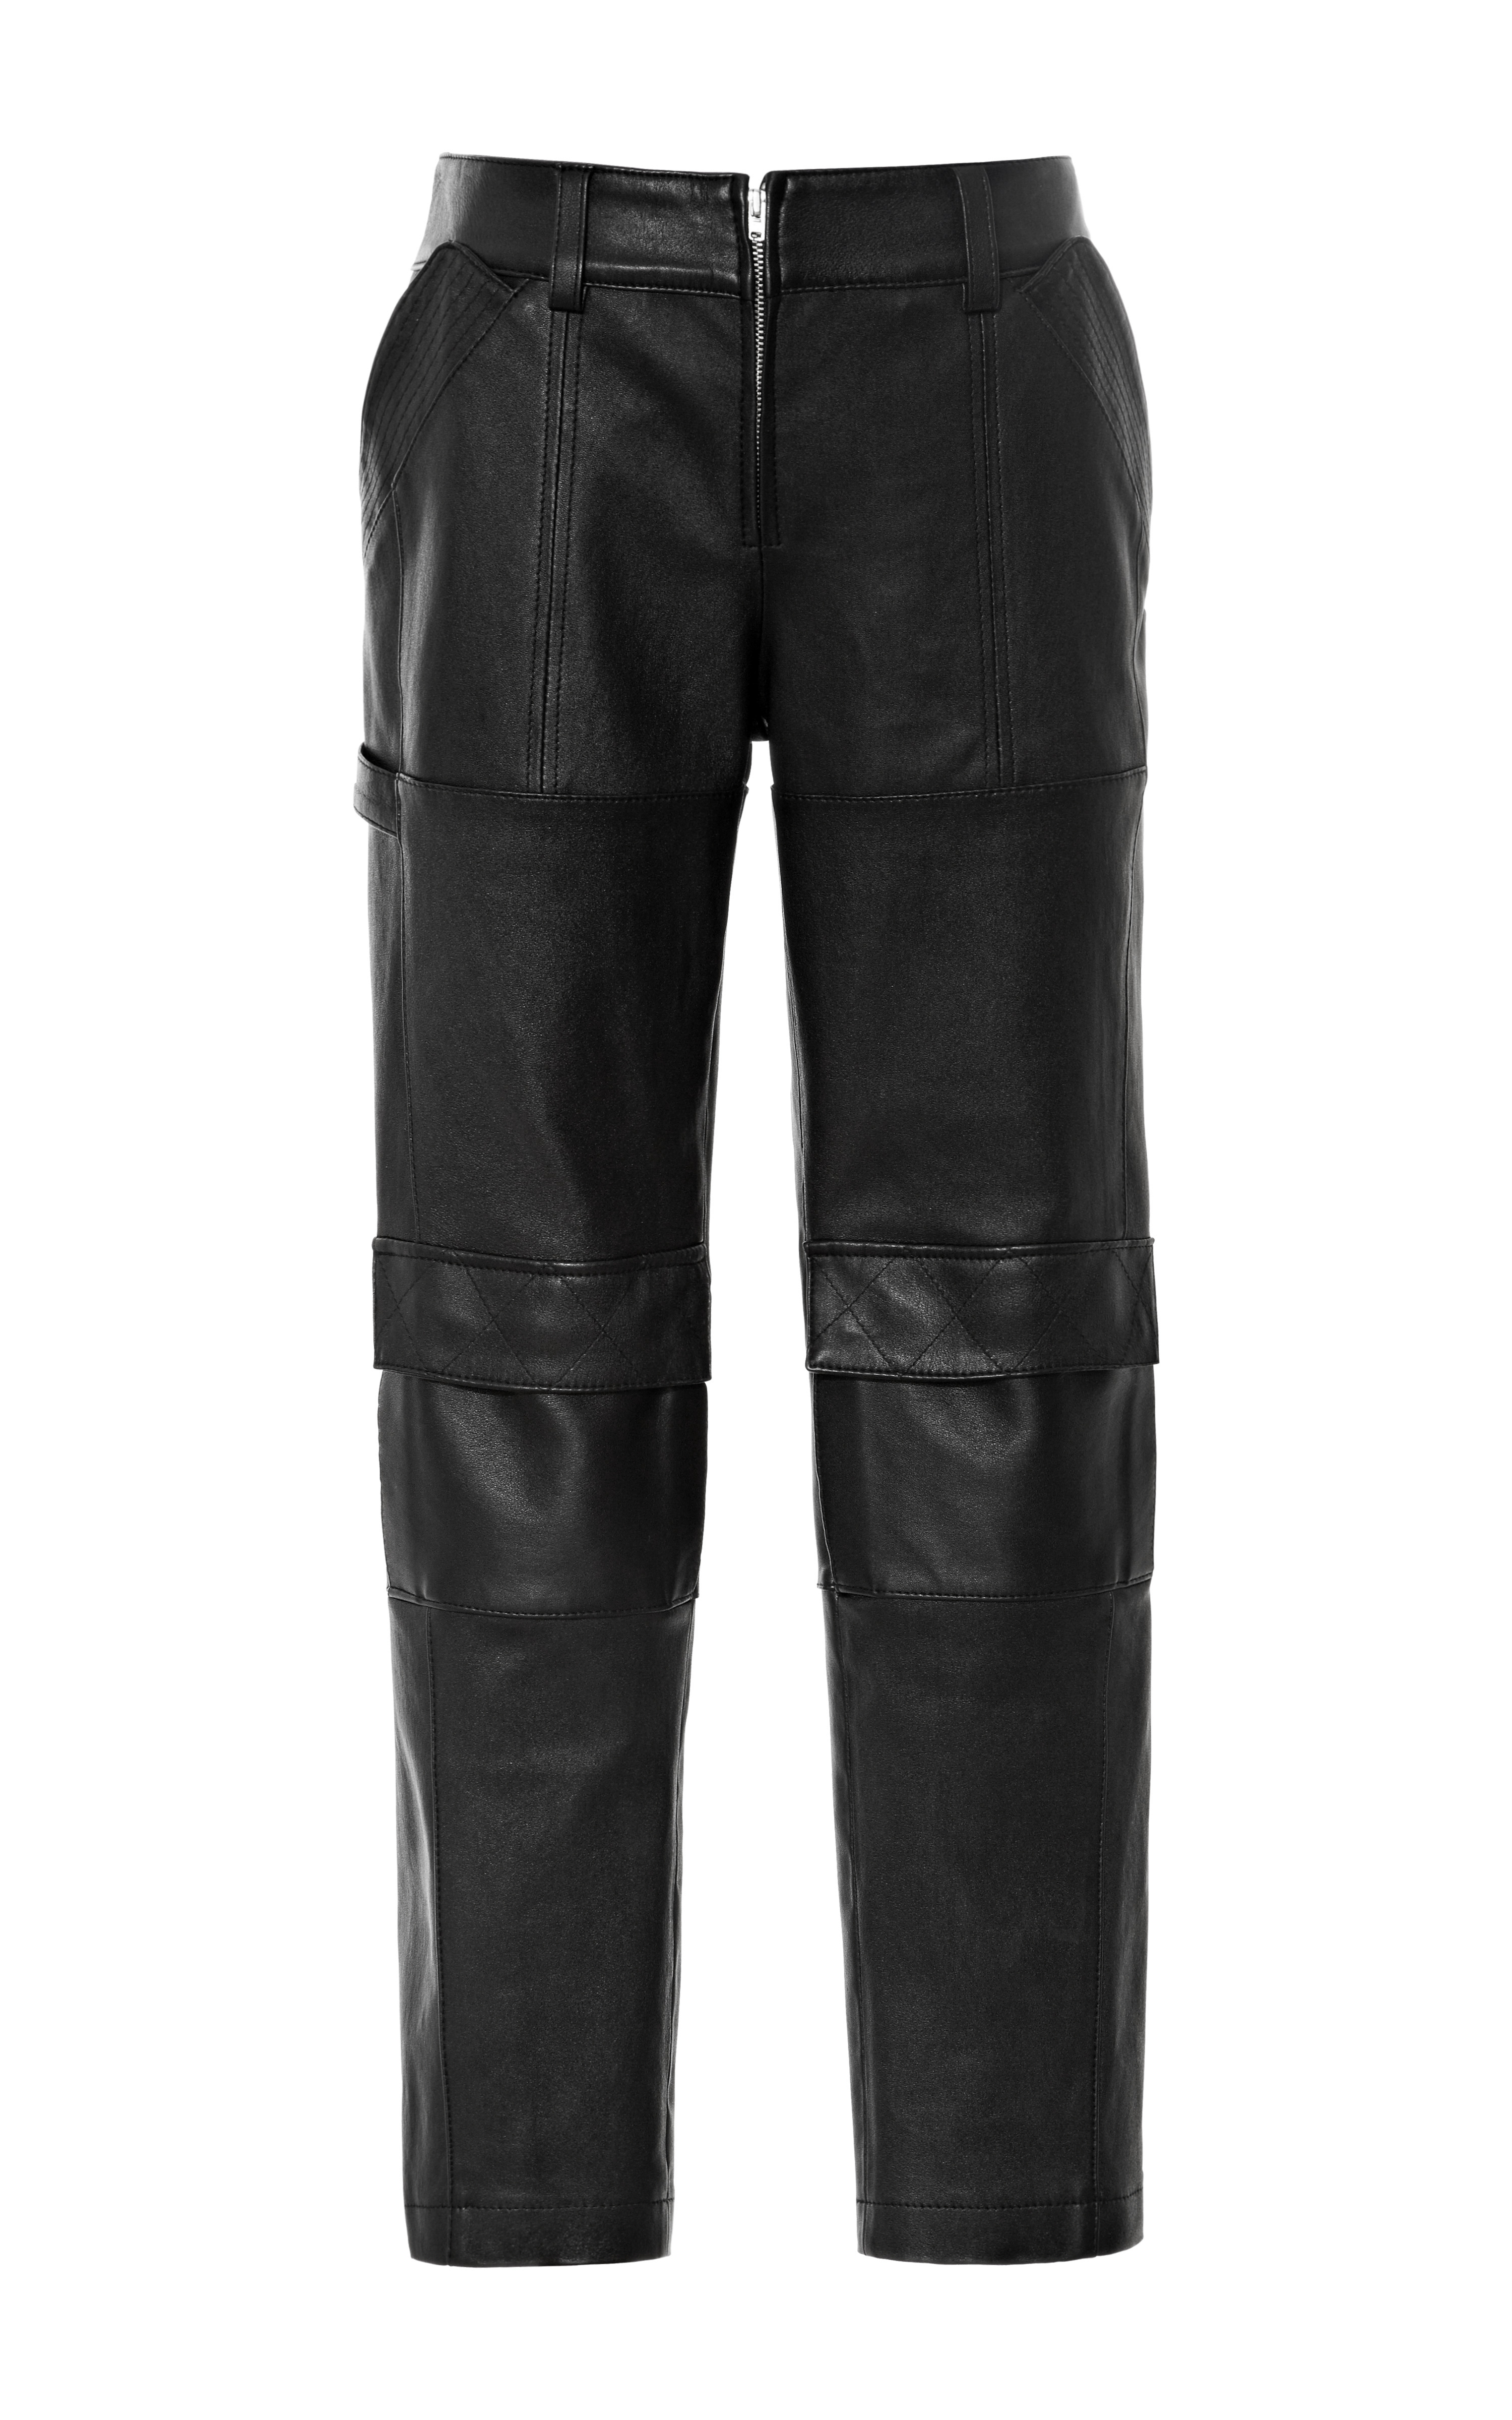 Opening ceremony Sera Stretch Leather Cargo Pants in Black | Lyst